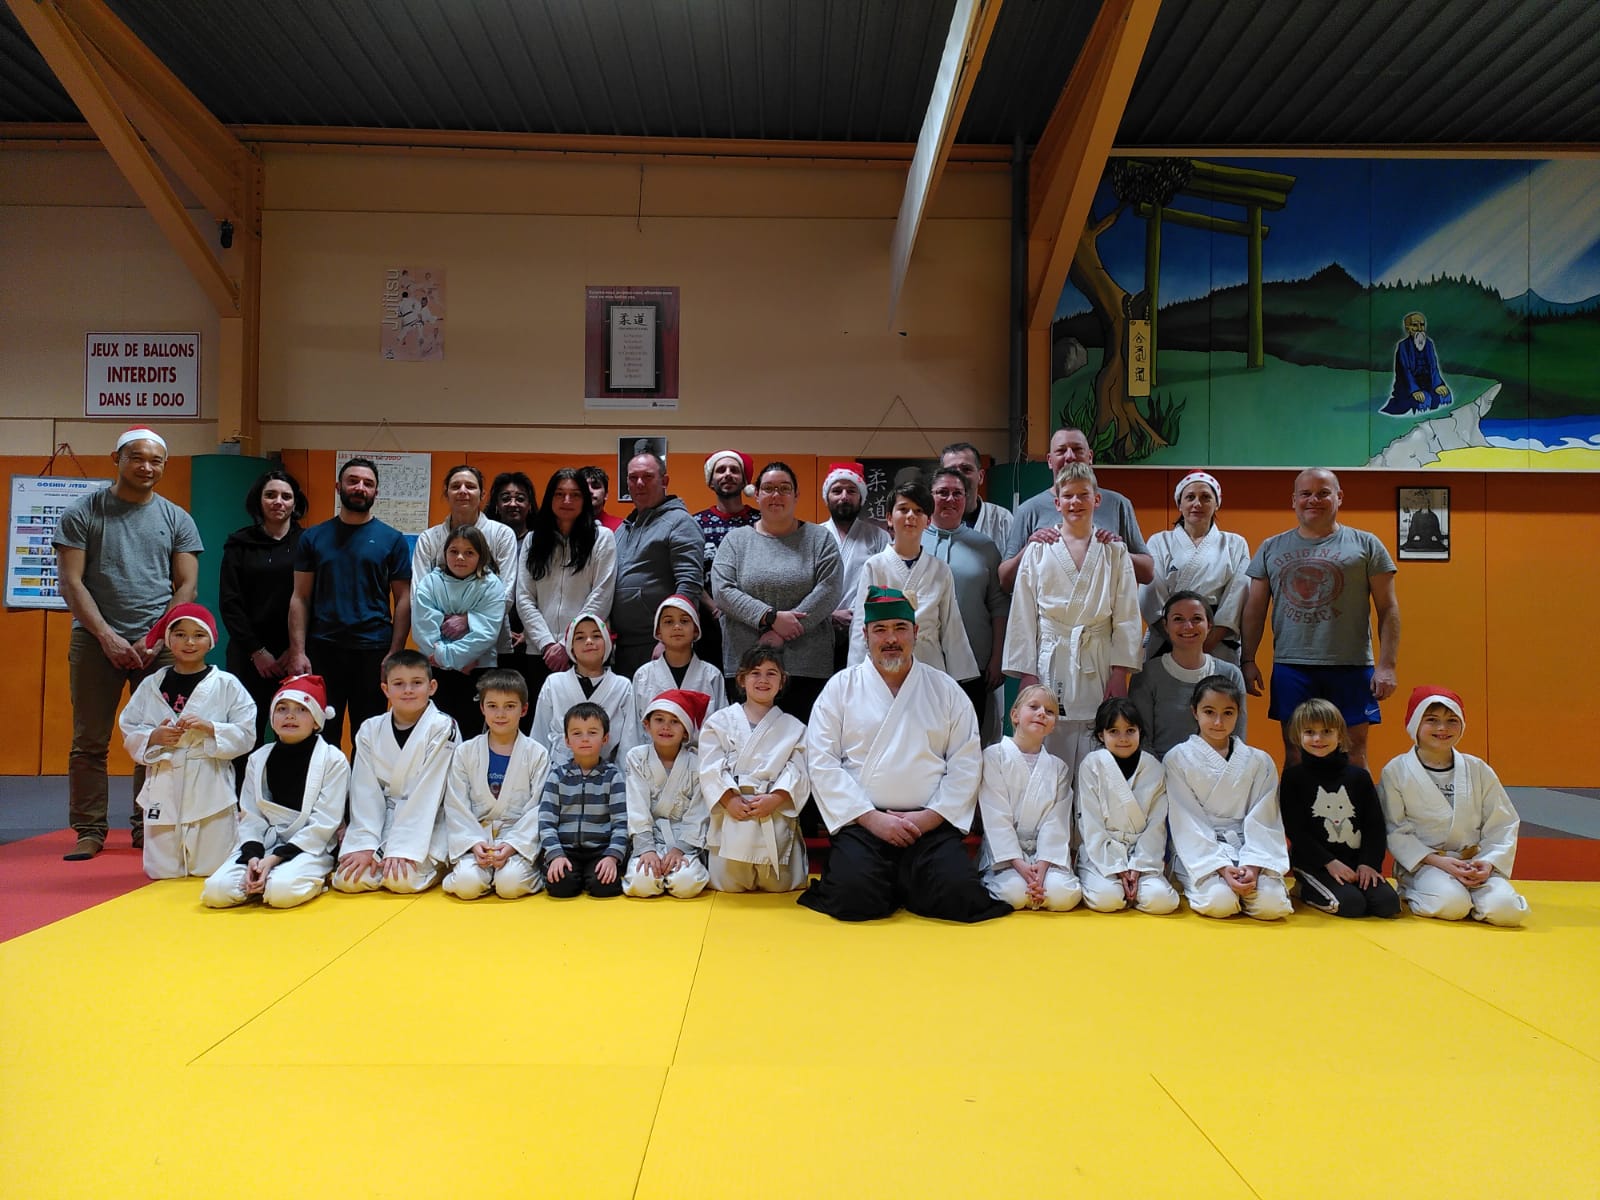 Image Noel 2022 - Vineuil Sports Aikido